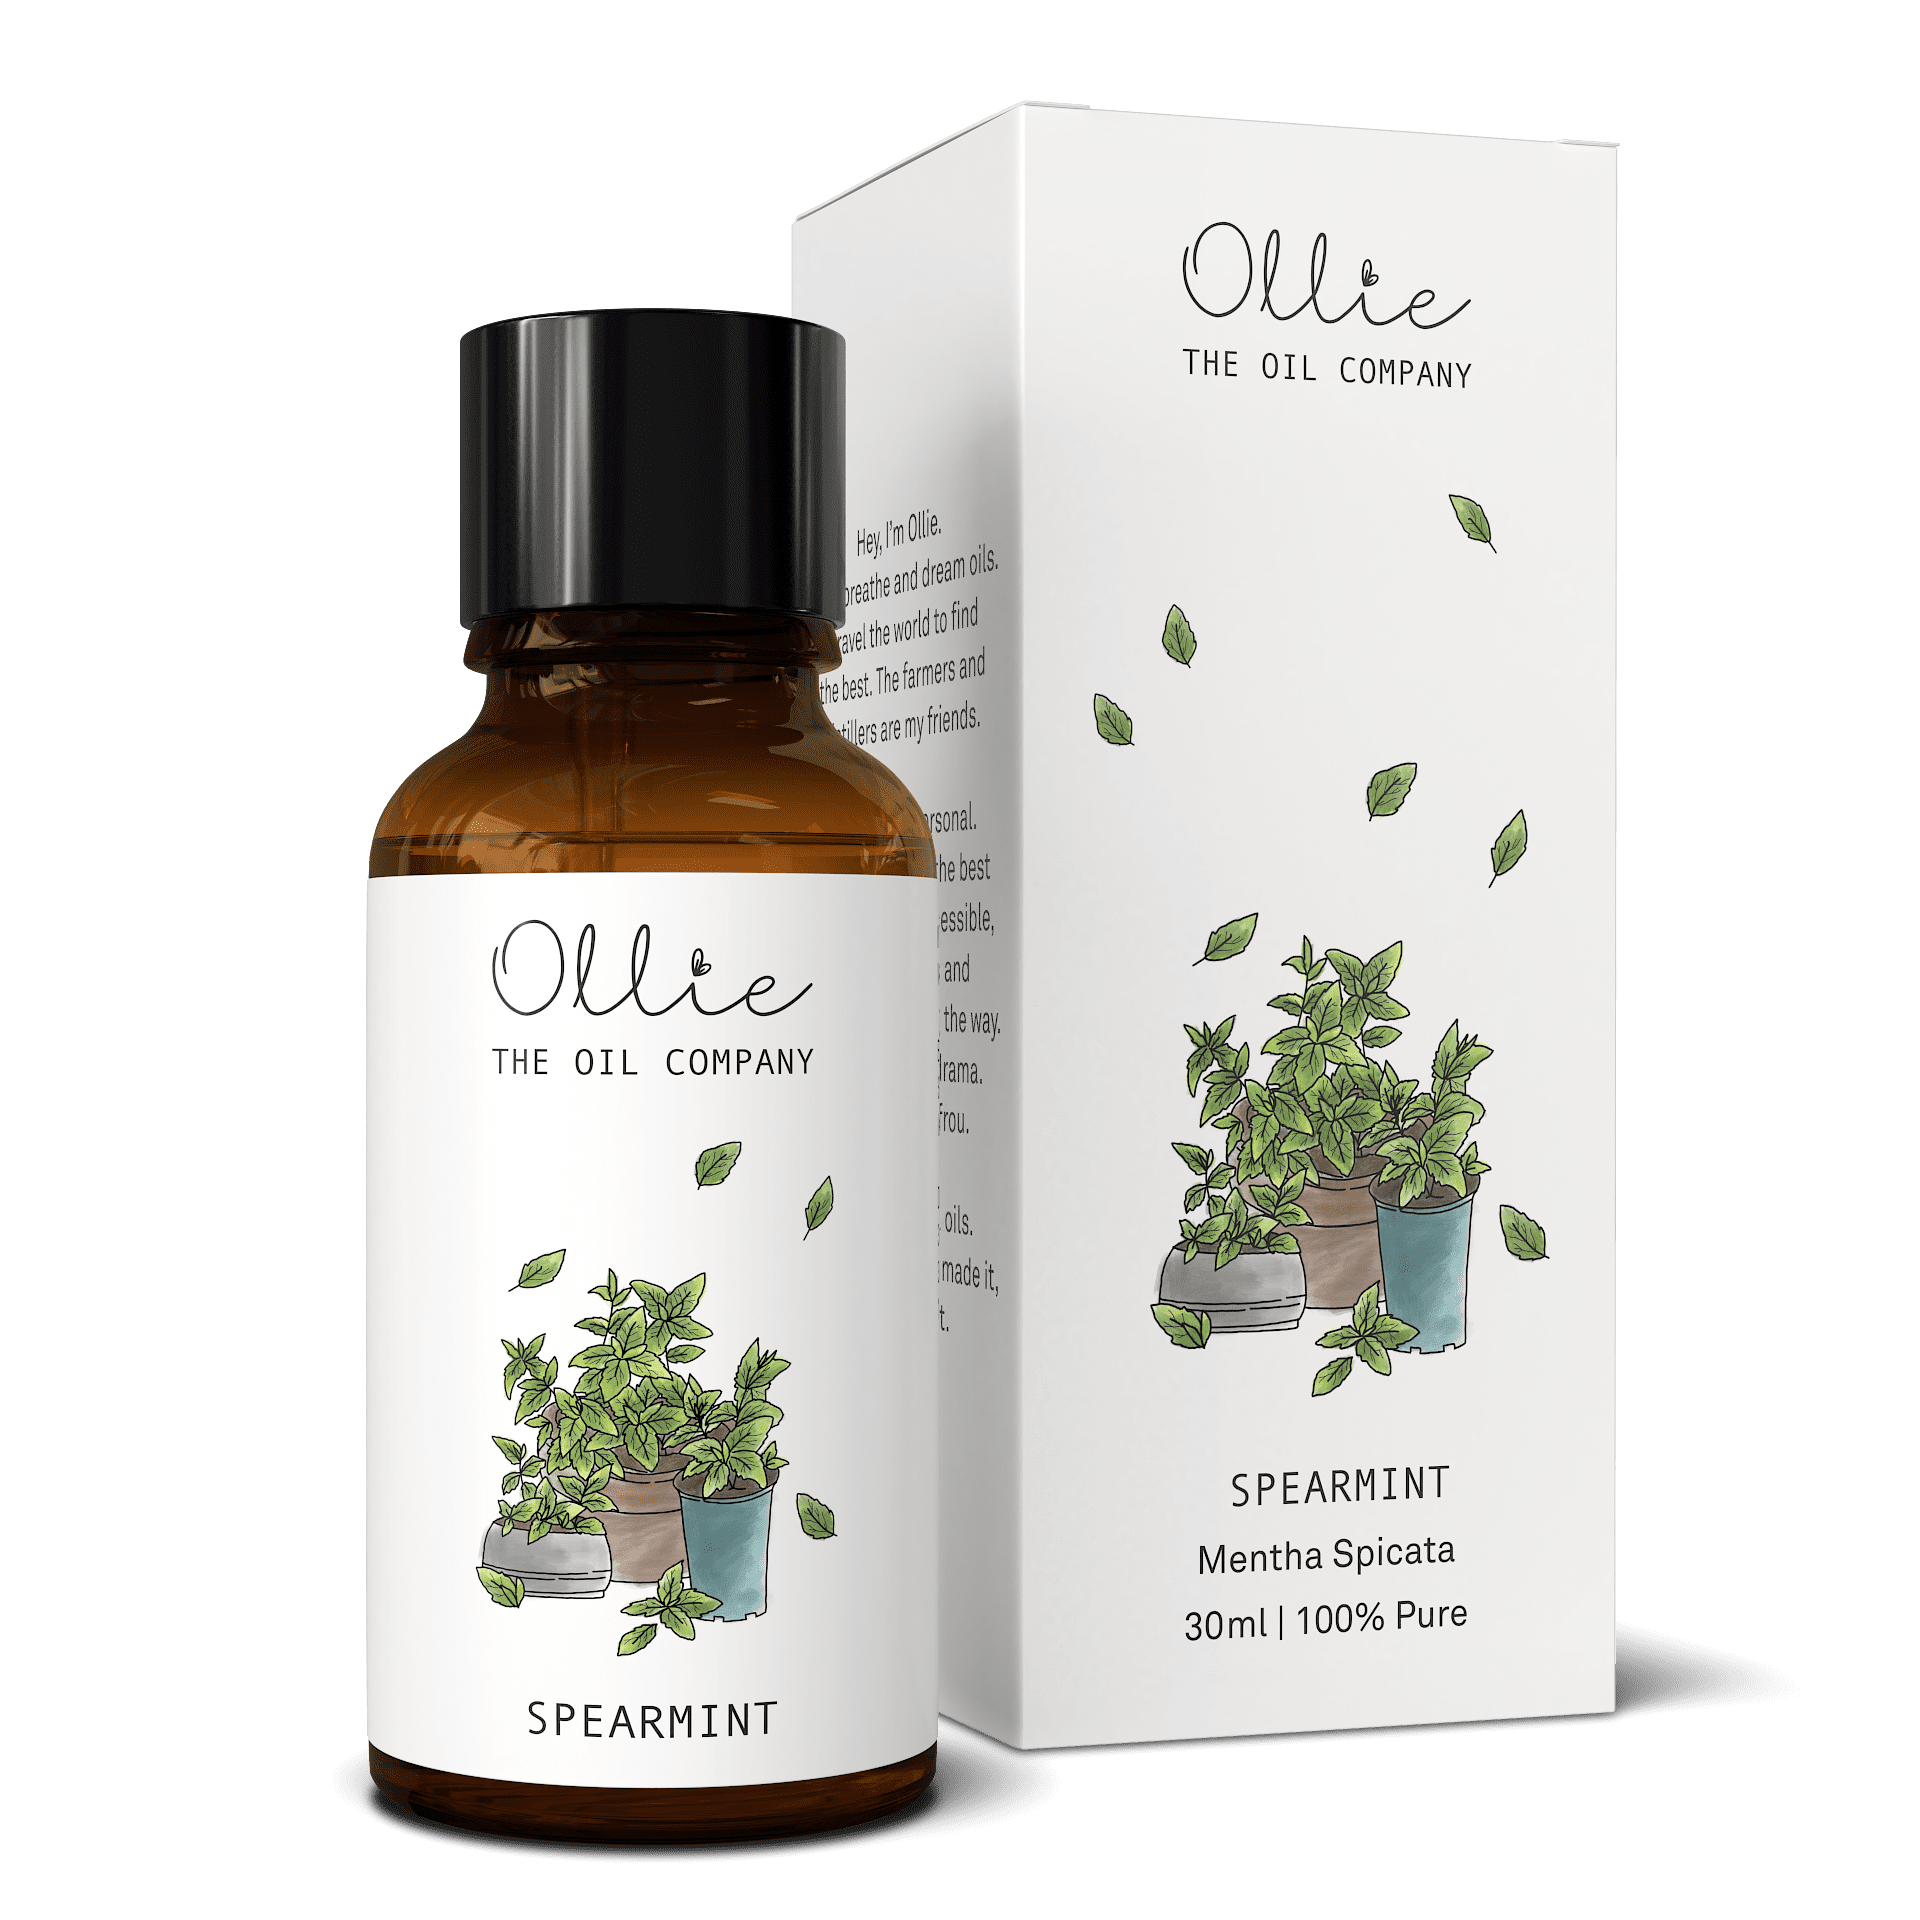 Ollie's Pure and Organic Spearmint Essential Oil